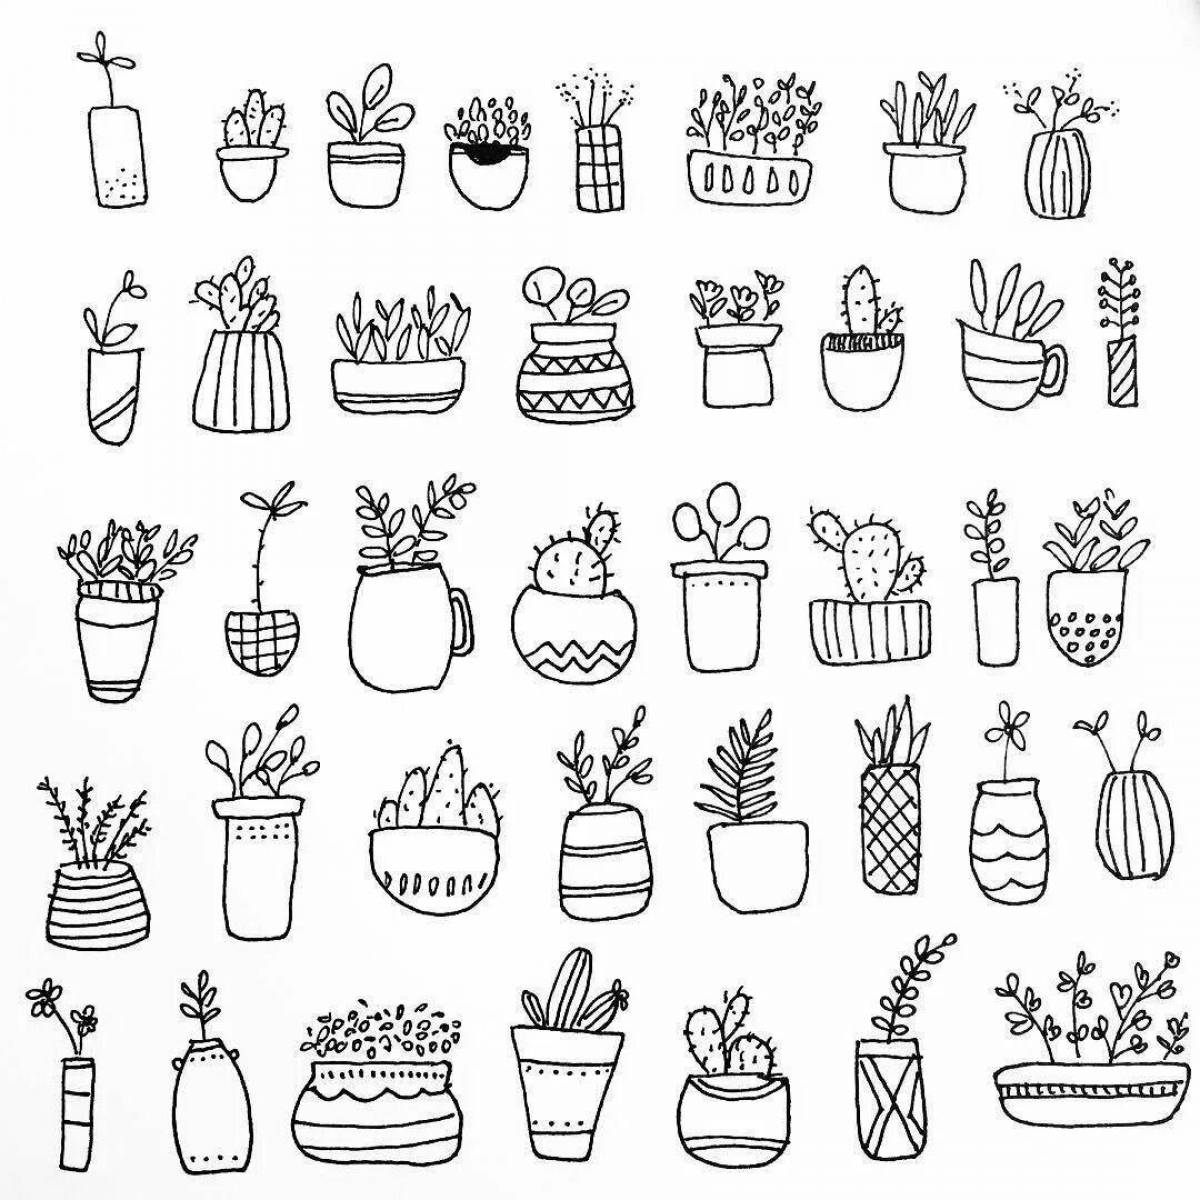 Funny coloring pages small drawings for stickers